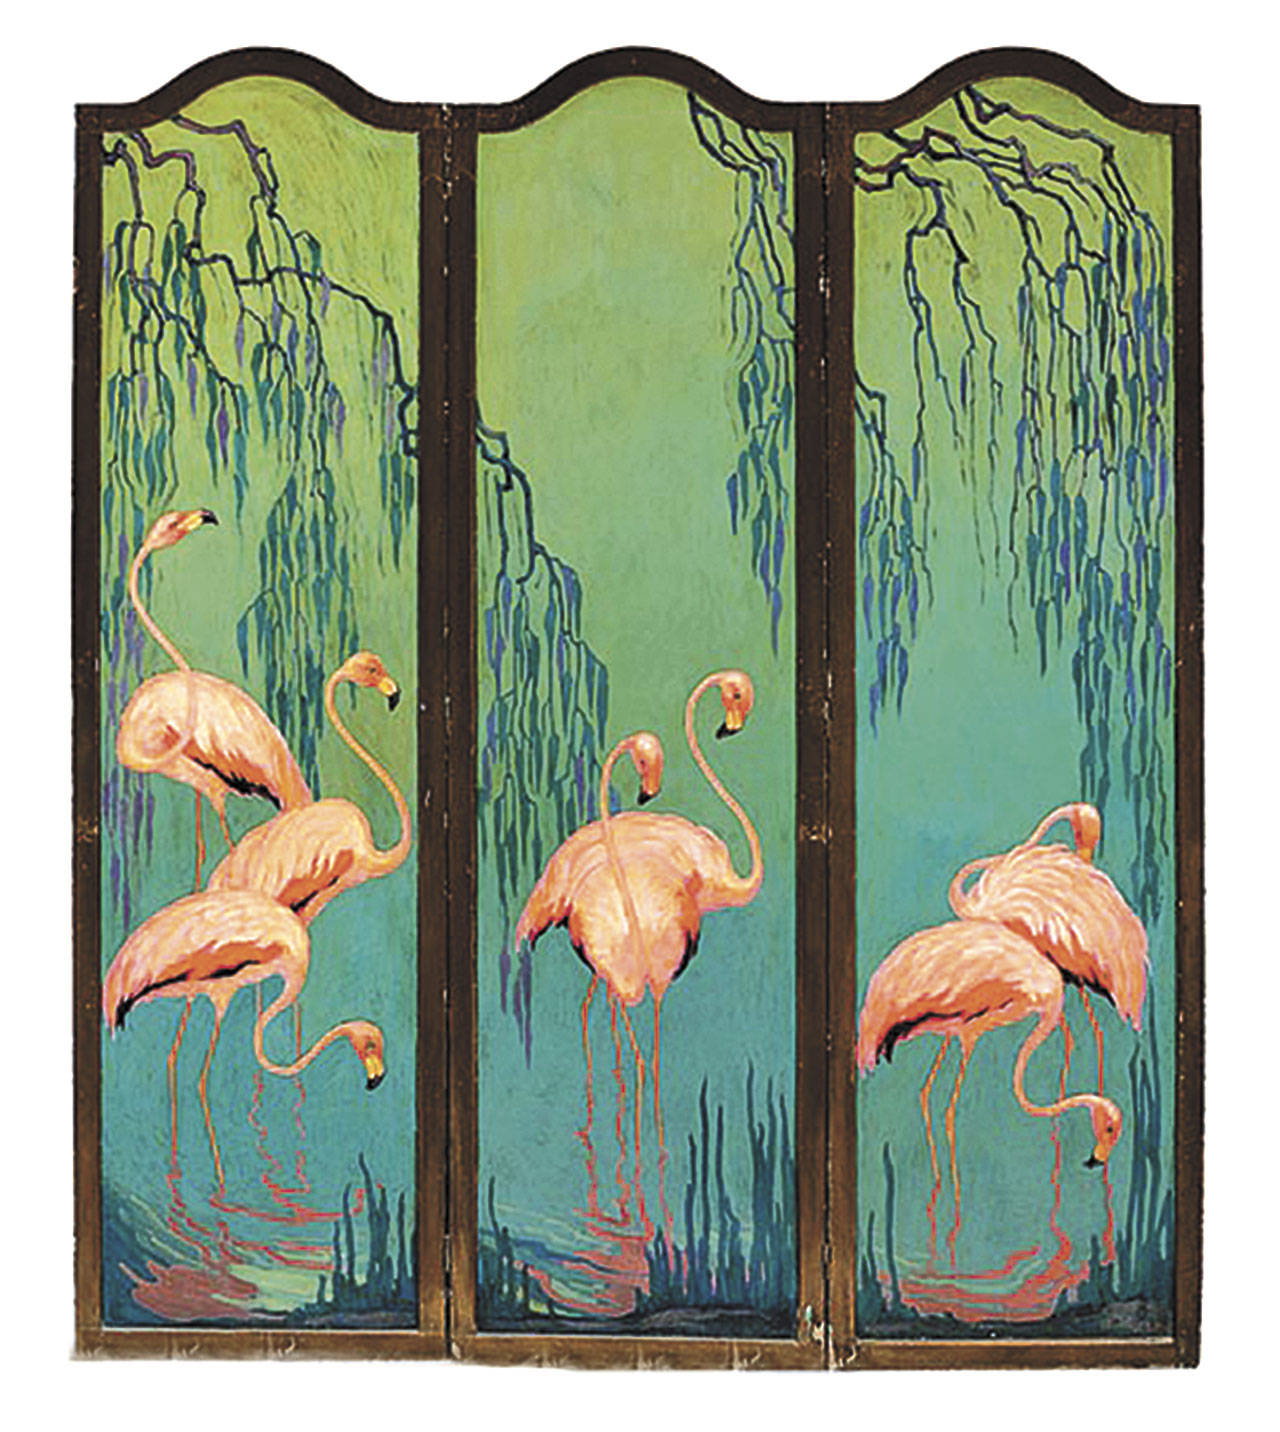 This screen, when opened, is 60 inches high and 69 inches wide. When completely closed, it is only 23 inches wide so it can be kept in a corner. The colorful flamingos helped the price reach $28,060. (Cowles Syndicate Inc.)